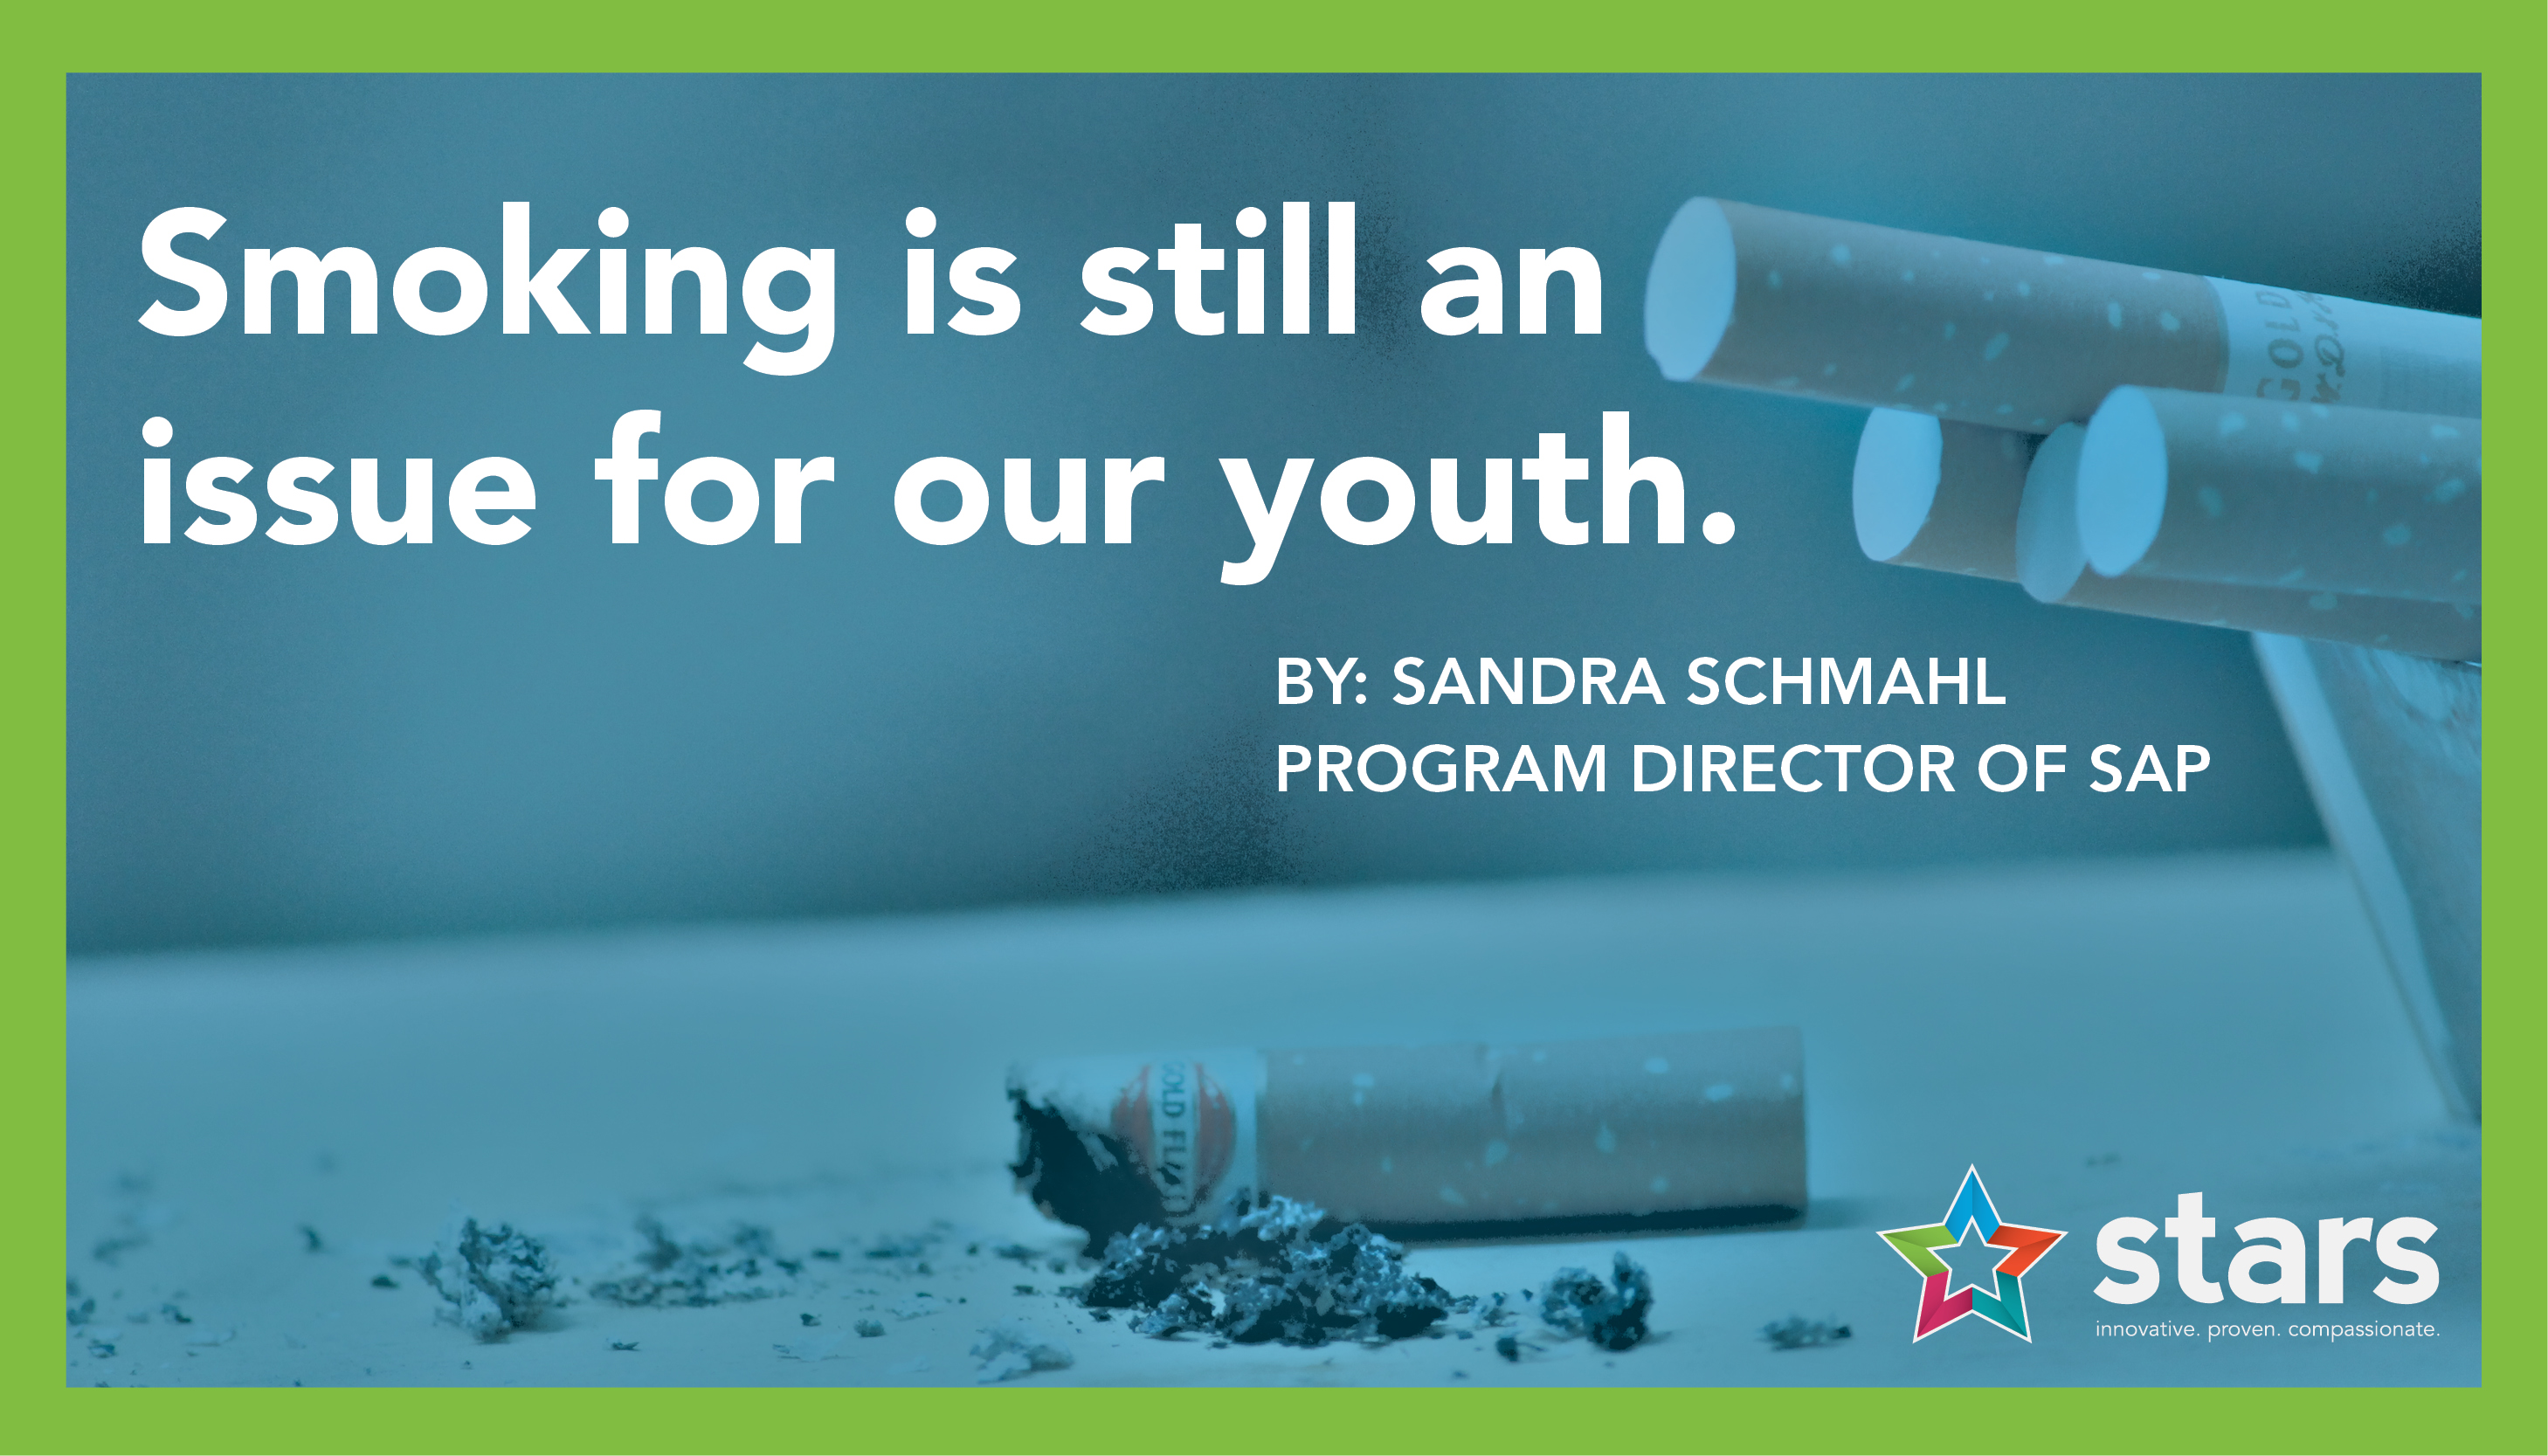 Smoking is still an issue for our youth.